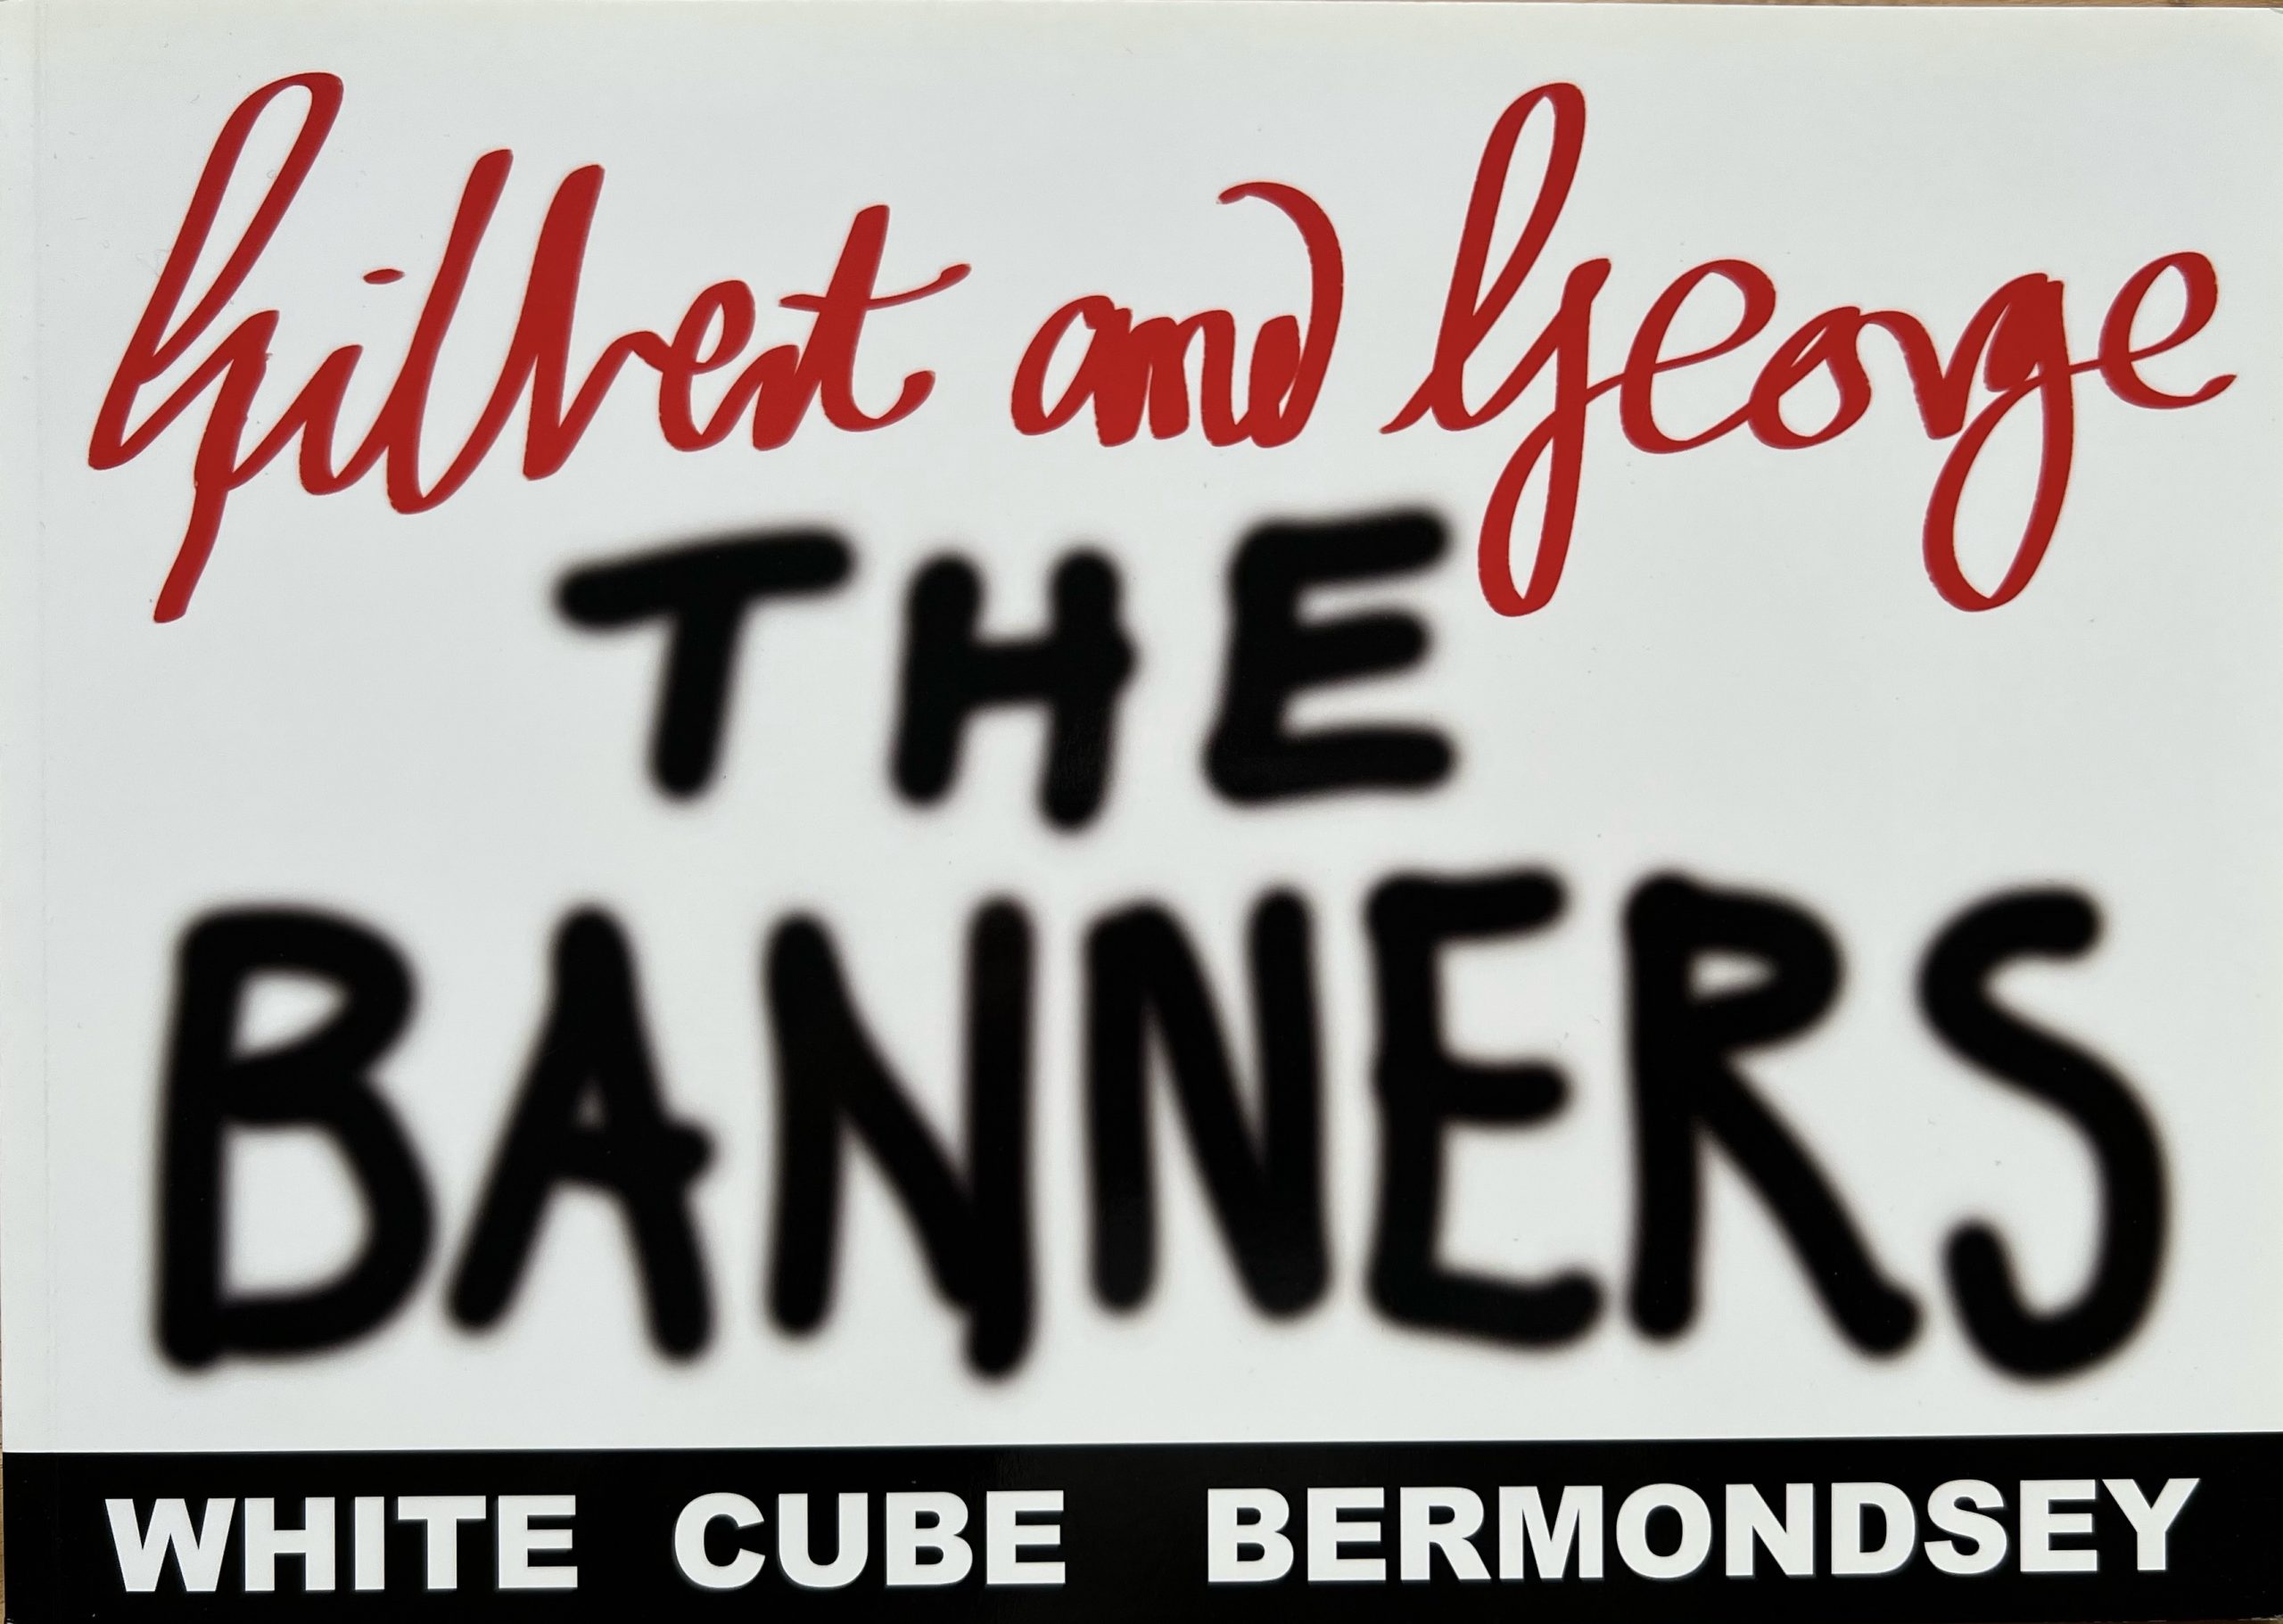 Gilbert & George The Banners signed book